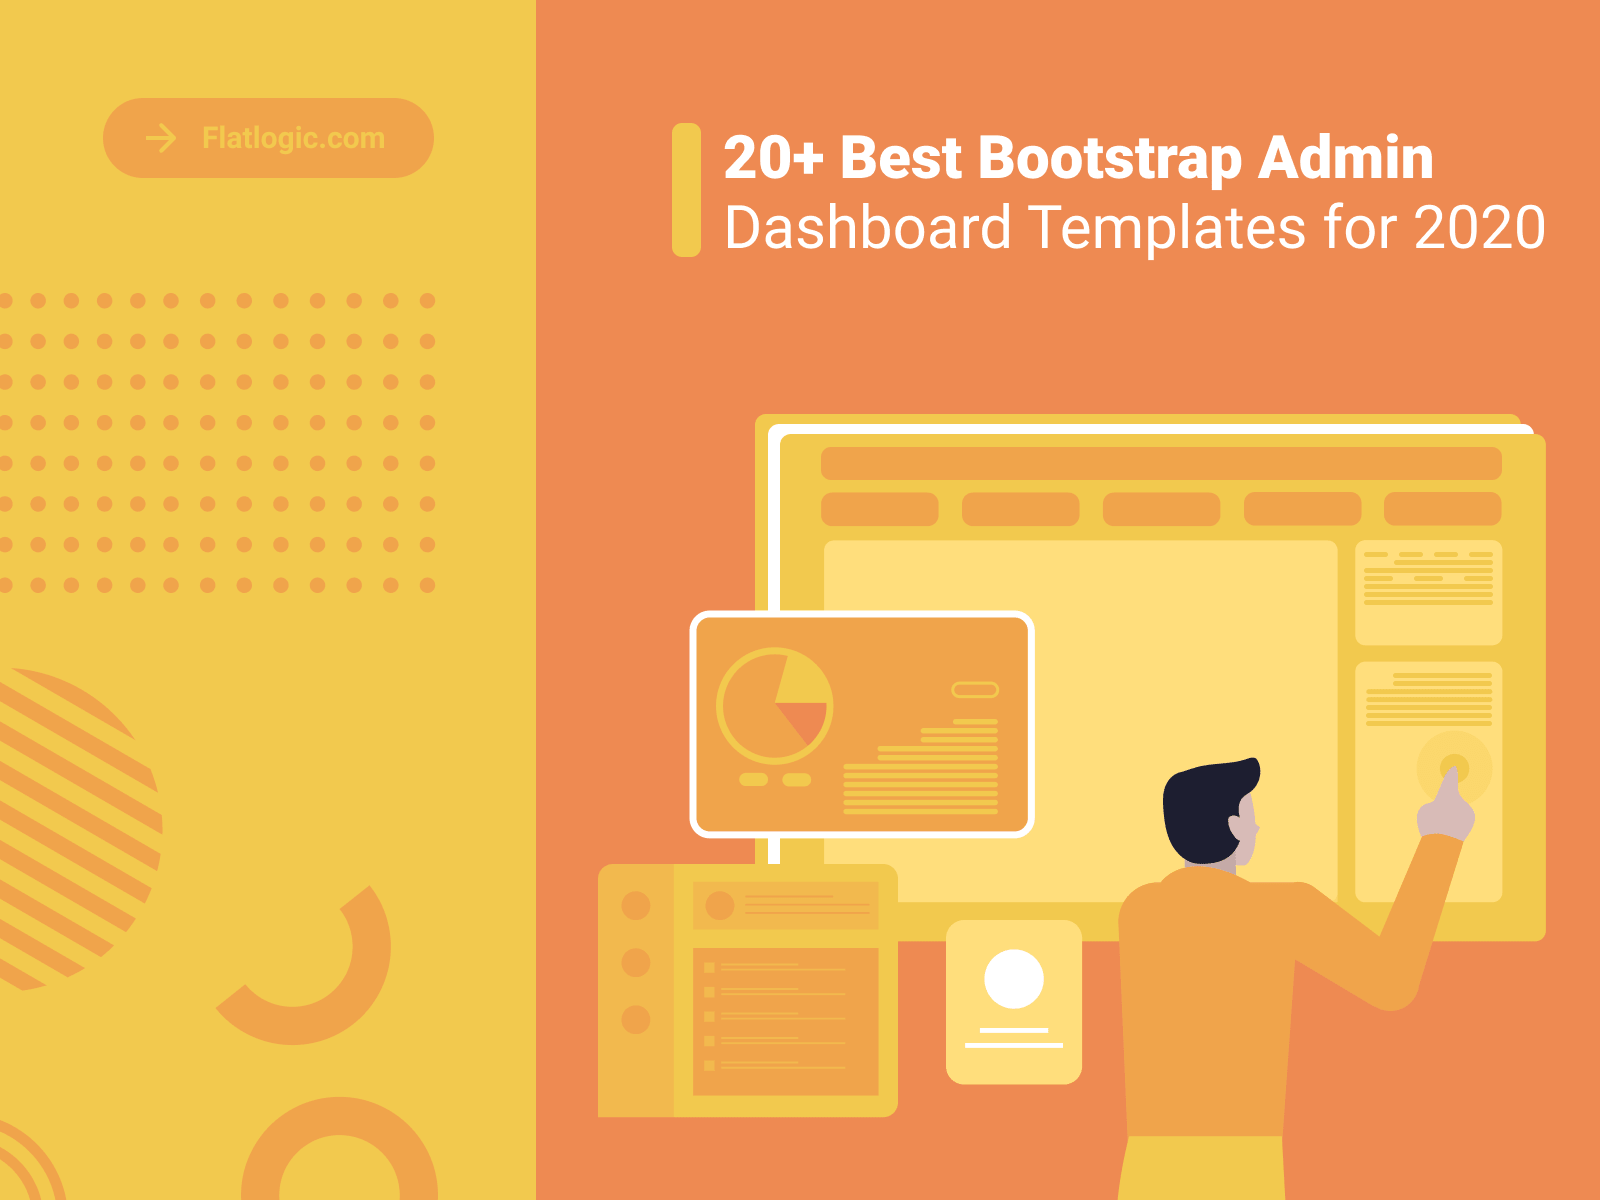 20+ Bootstrap Admin Dashboard Templates for 2020